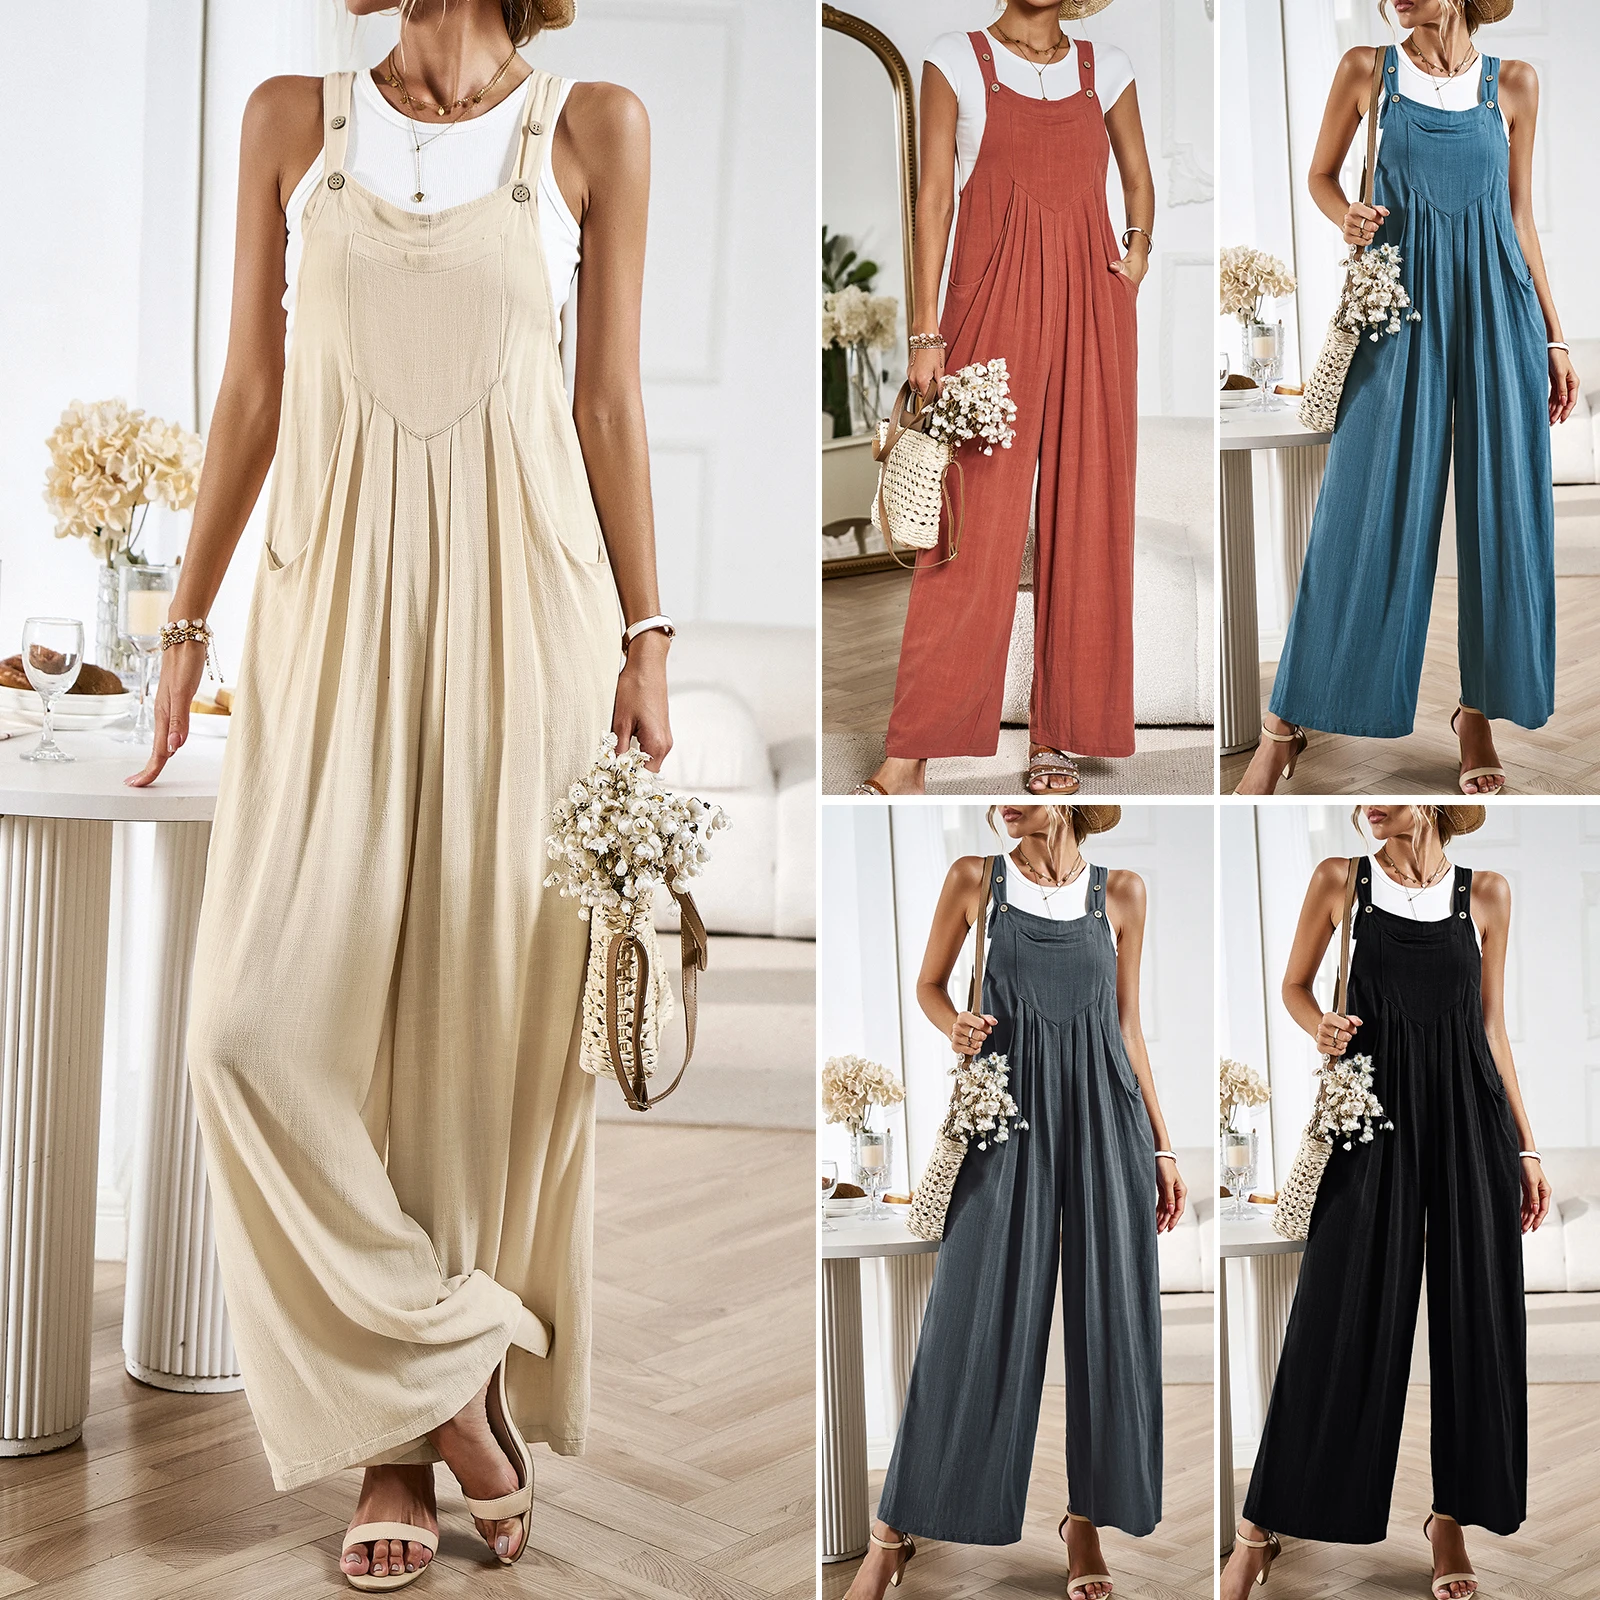 Adjustable Straps Loose Overalls Fashion Casual Button Wide Leg Straight Jumpsuit Summer Sleeveless Trousers with Pockets Romper